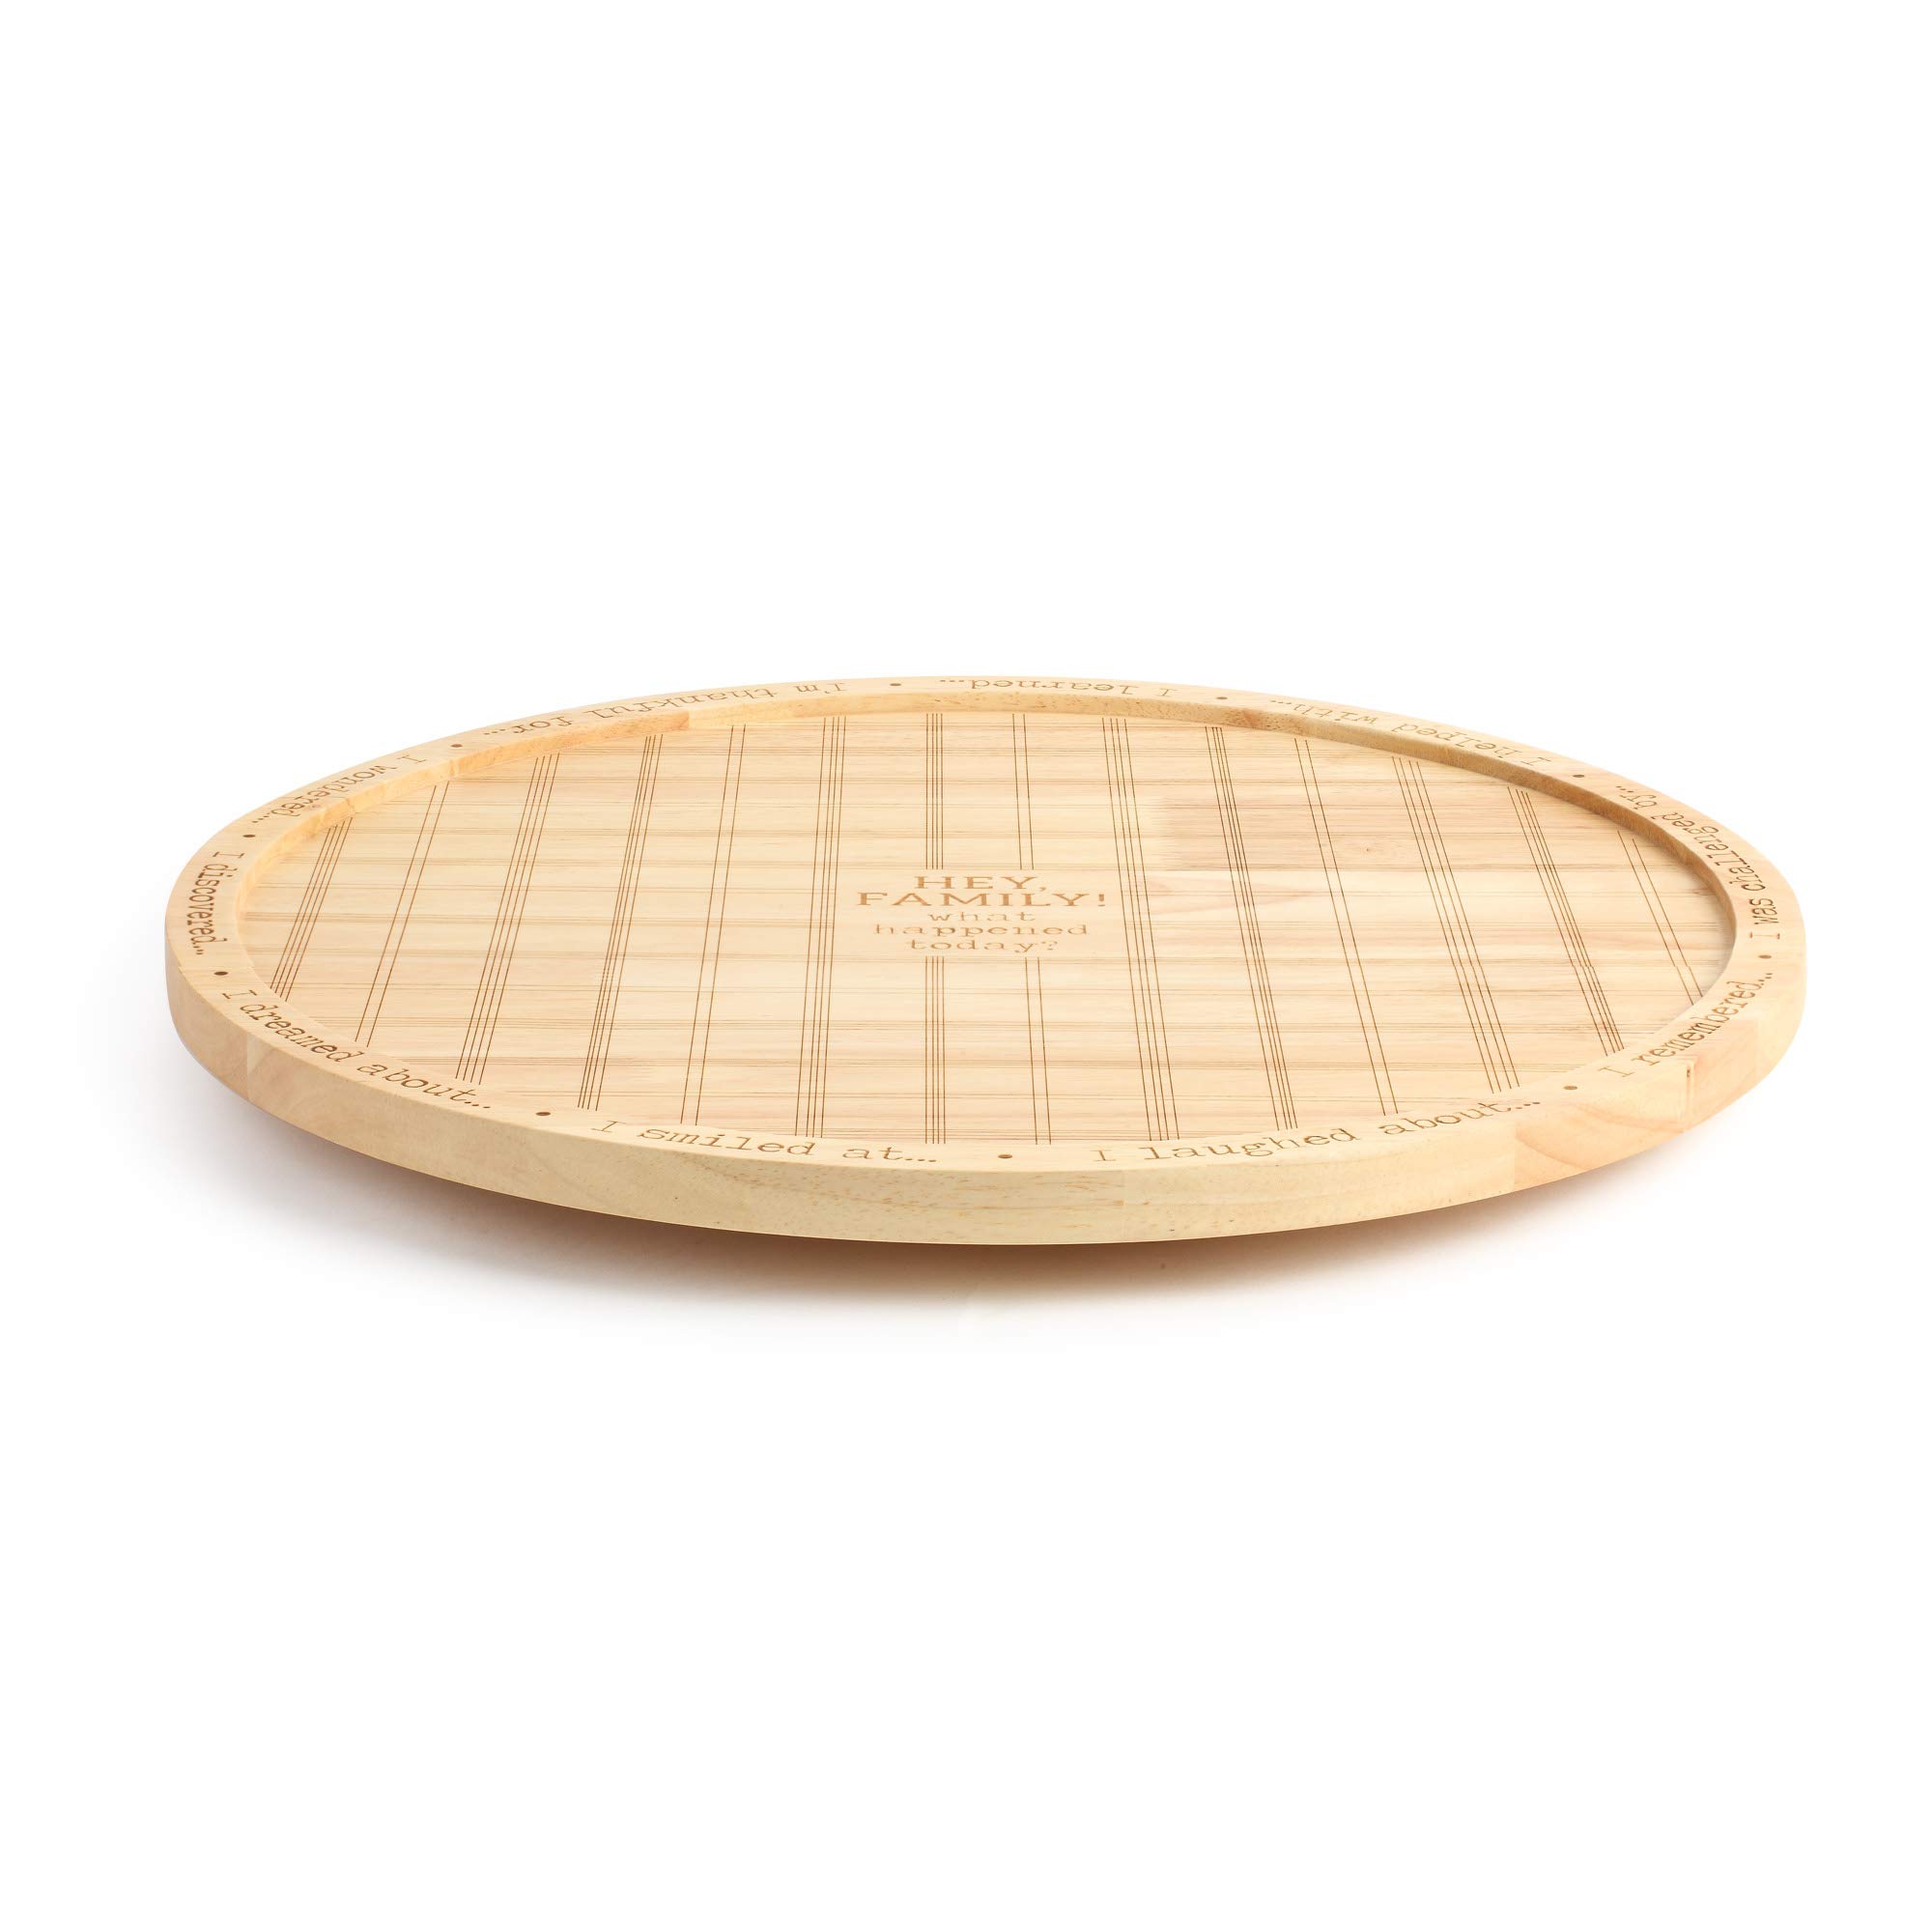 Demdaco Hey Family! What Happened Today Natural Brown 19 x 19 Wood Decorative Lazy Susan Serving Tray